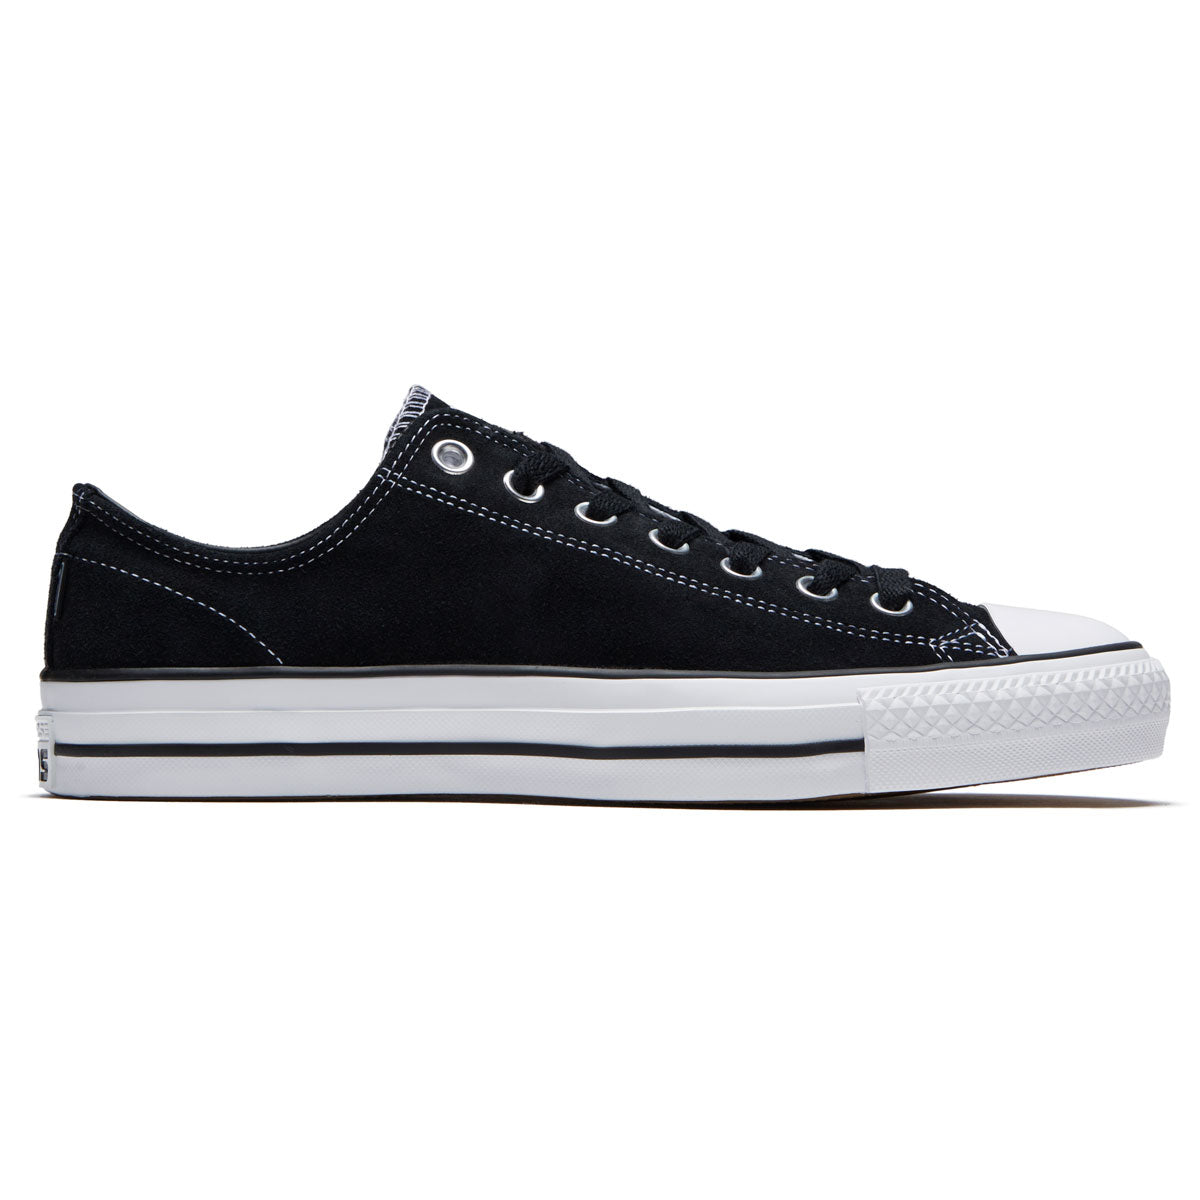 Converse Chuck Taylor All Star Pro Suede Ox Shoes - Black/Black/White image 1